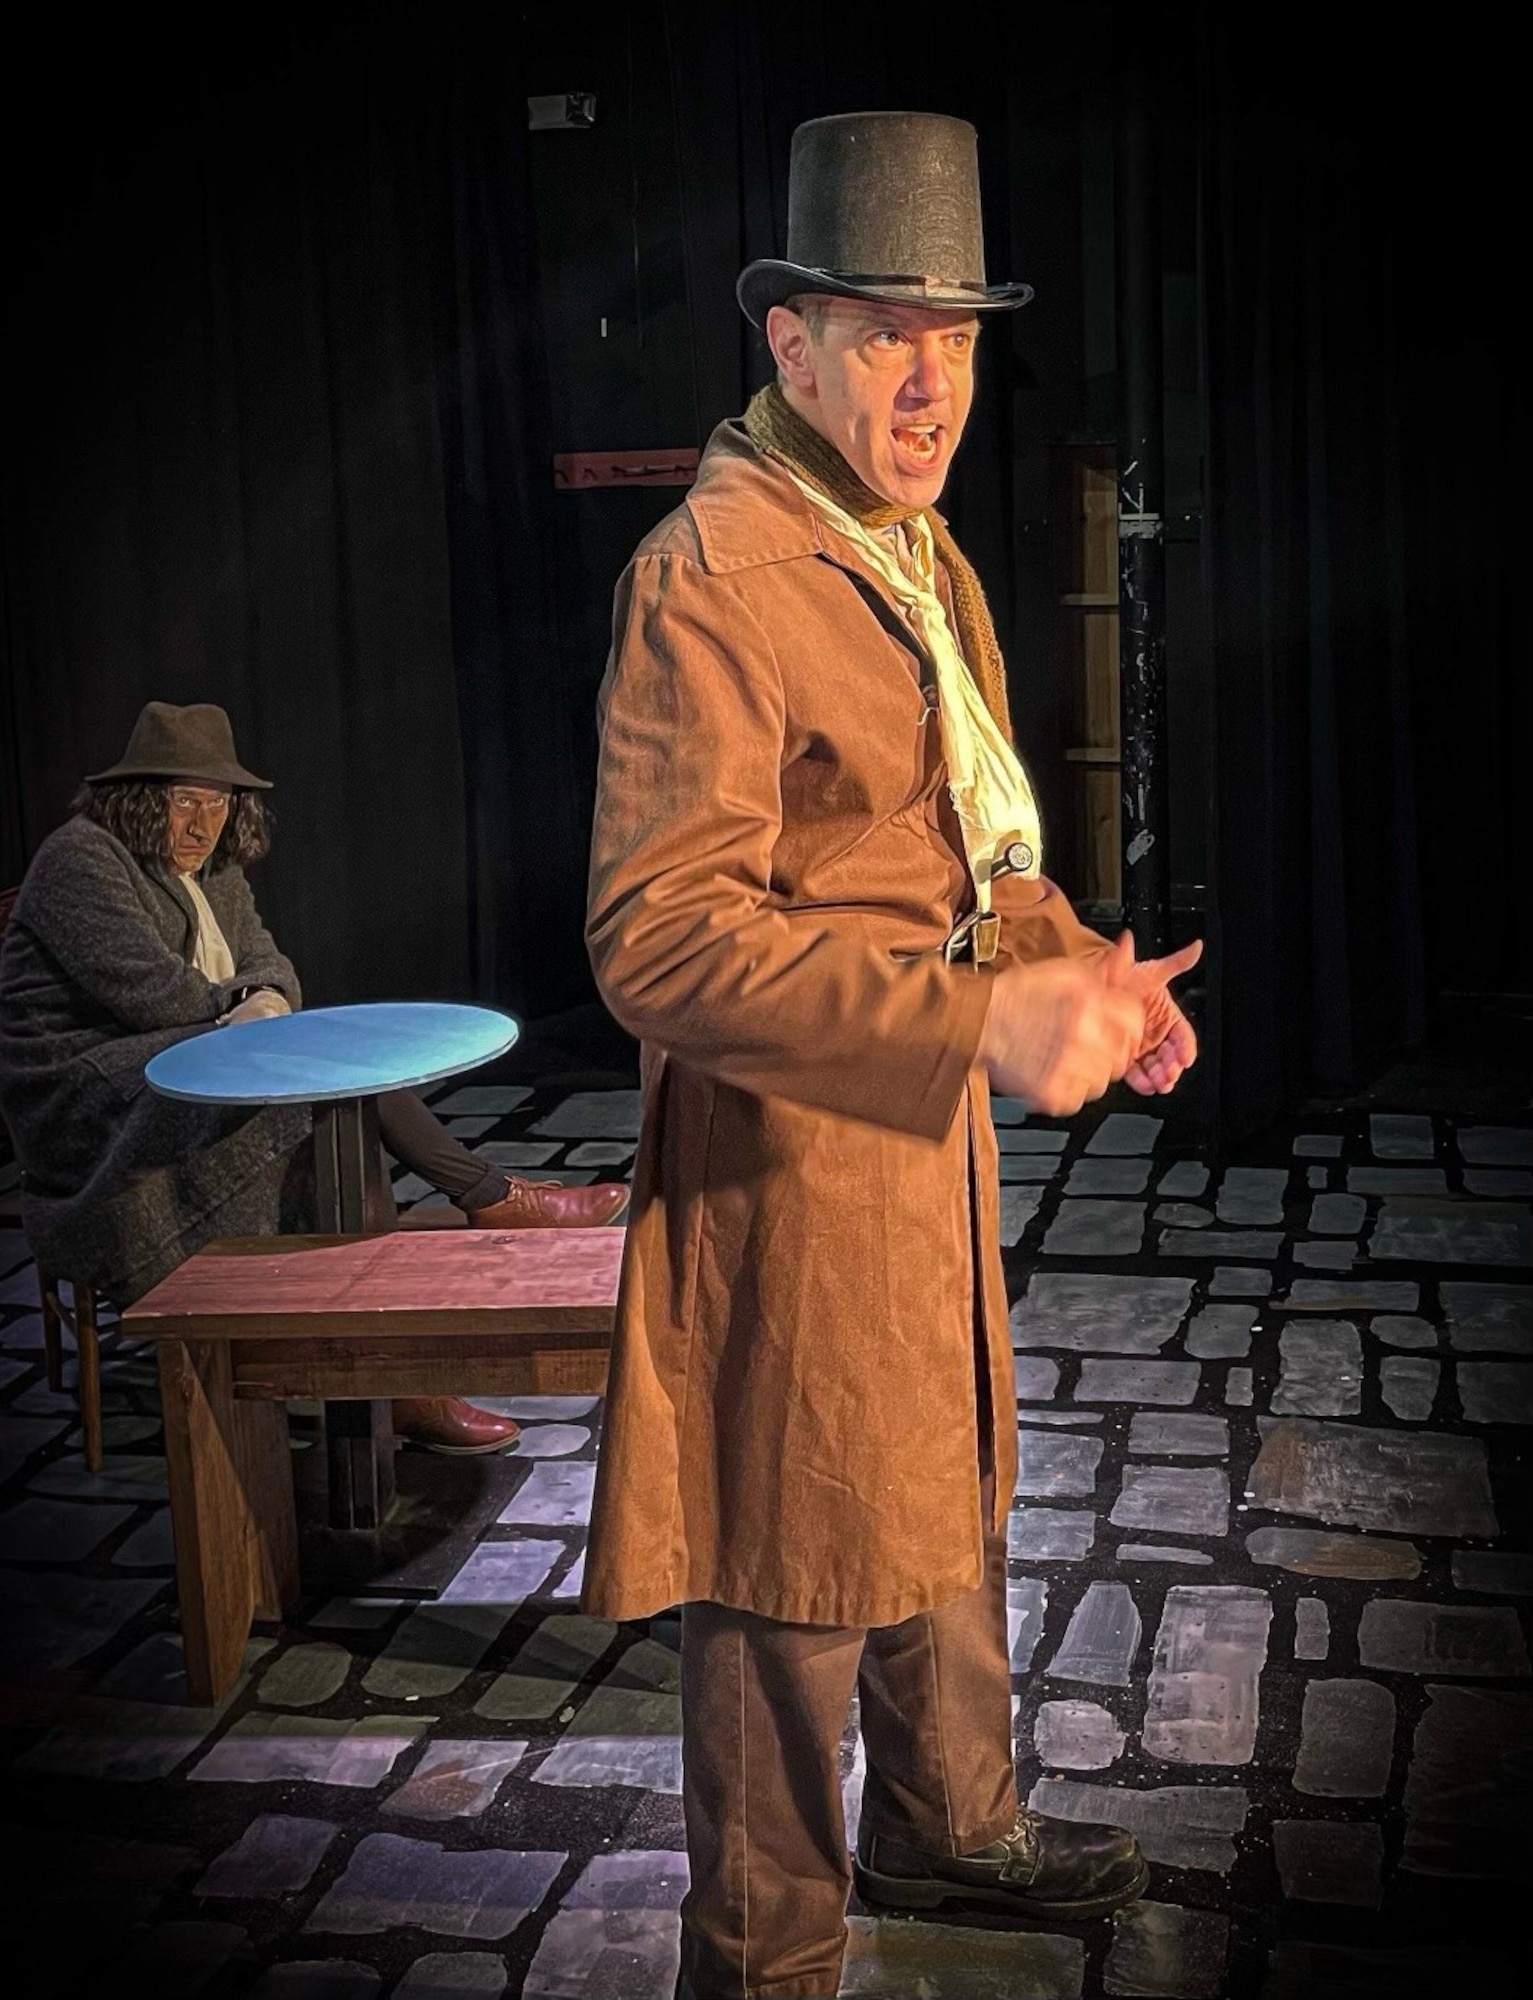 AEDC team member Frank Wonder stands and sings as his character Bill Sikes in the musical “Oliver!” during a rehearsal while AEDC team member J.D. Dill sits behind him looking on.